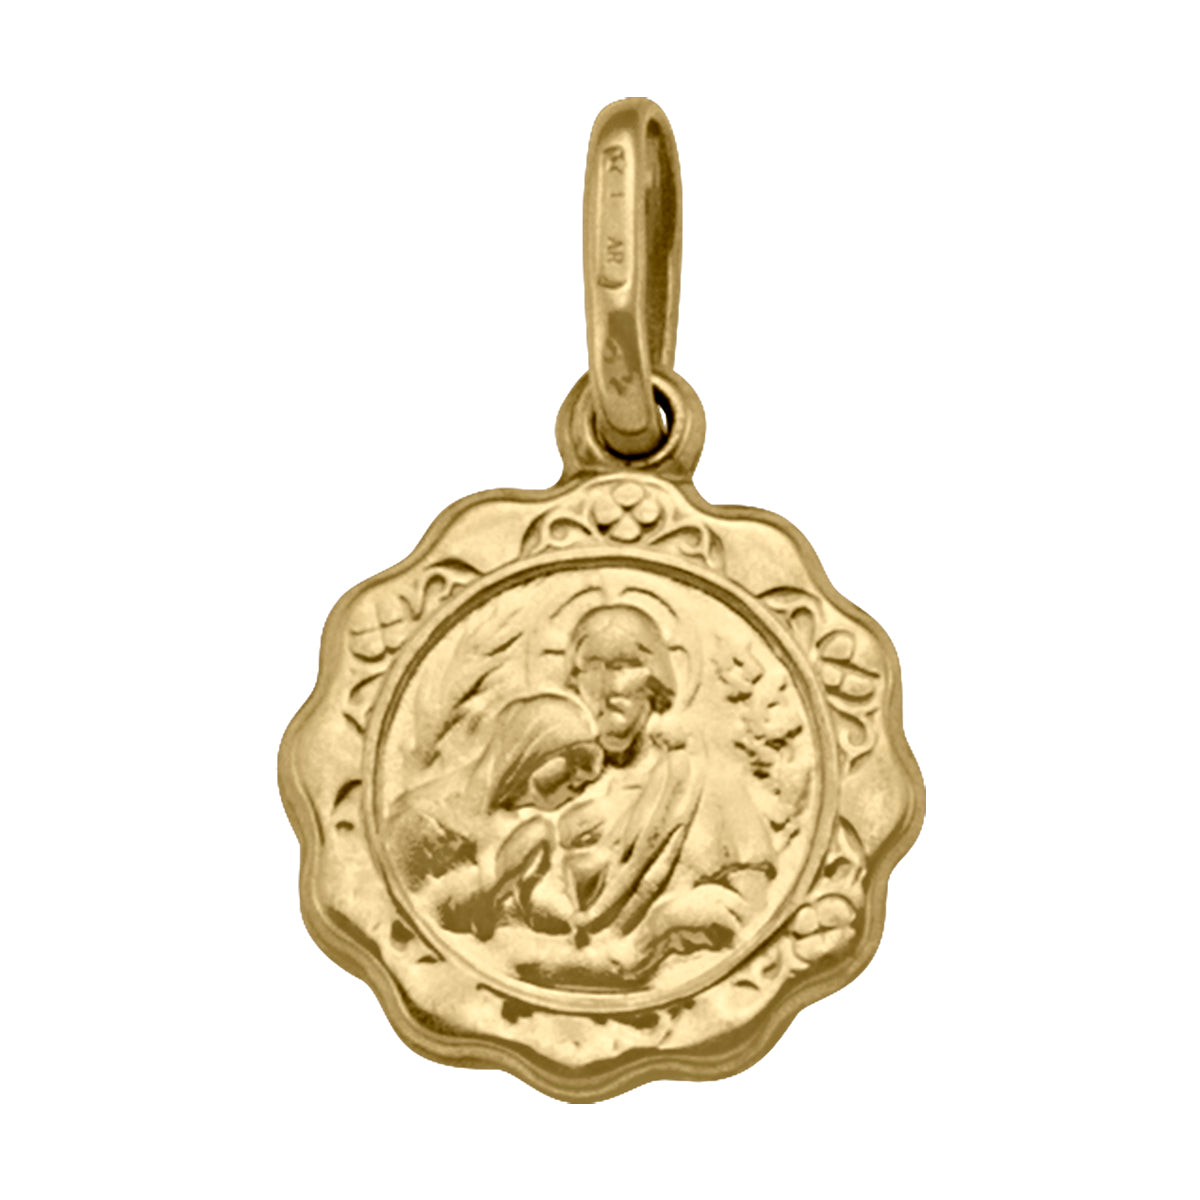 CONFIRMATION MEDAL YELLOW GOLD SOLID